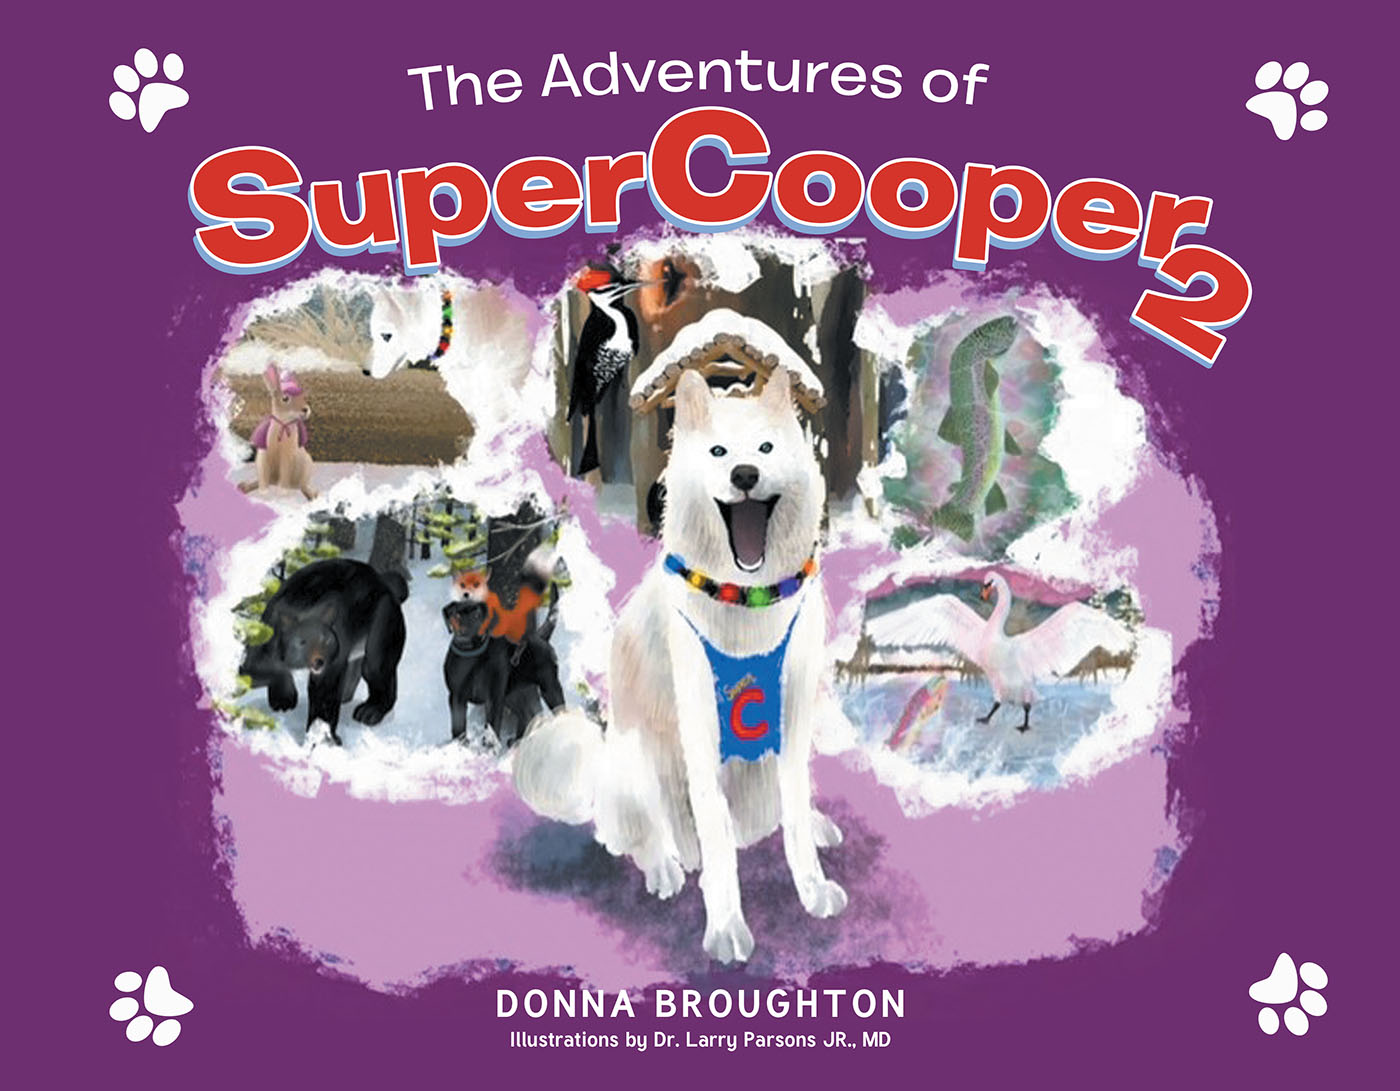 Author Donna Broughton’s New Book, "The Adventures of SuperCooper 2," is an Entertaining Children’s Story, Starring a Fun-Loving Husky & His Best Friends